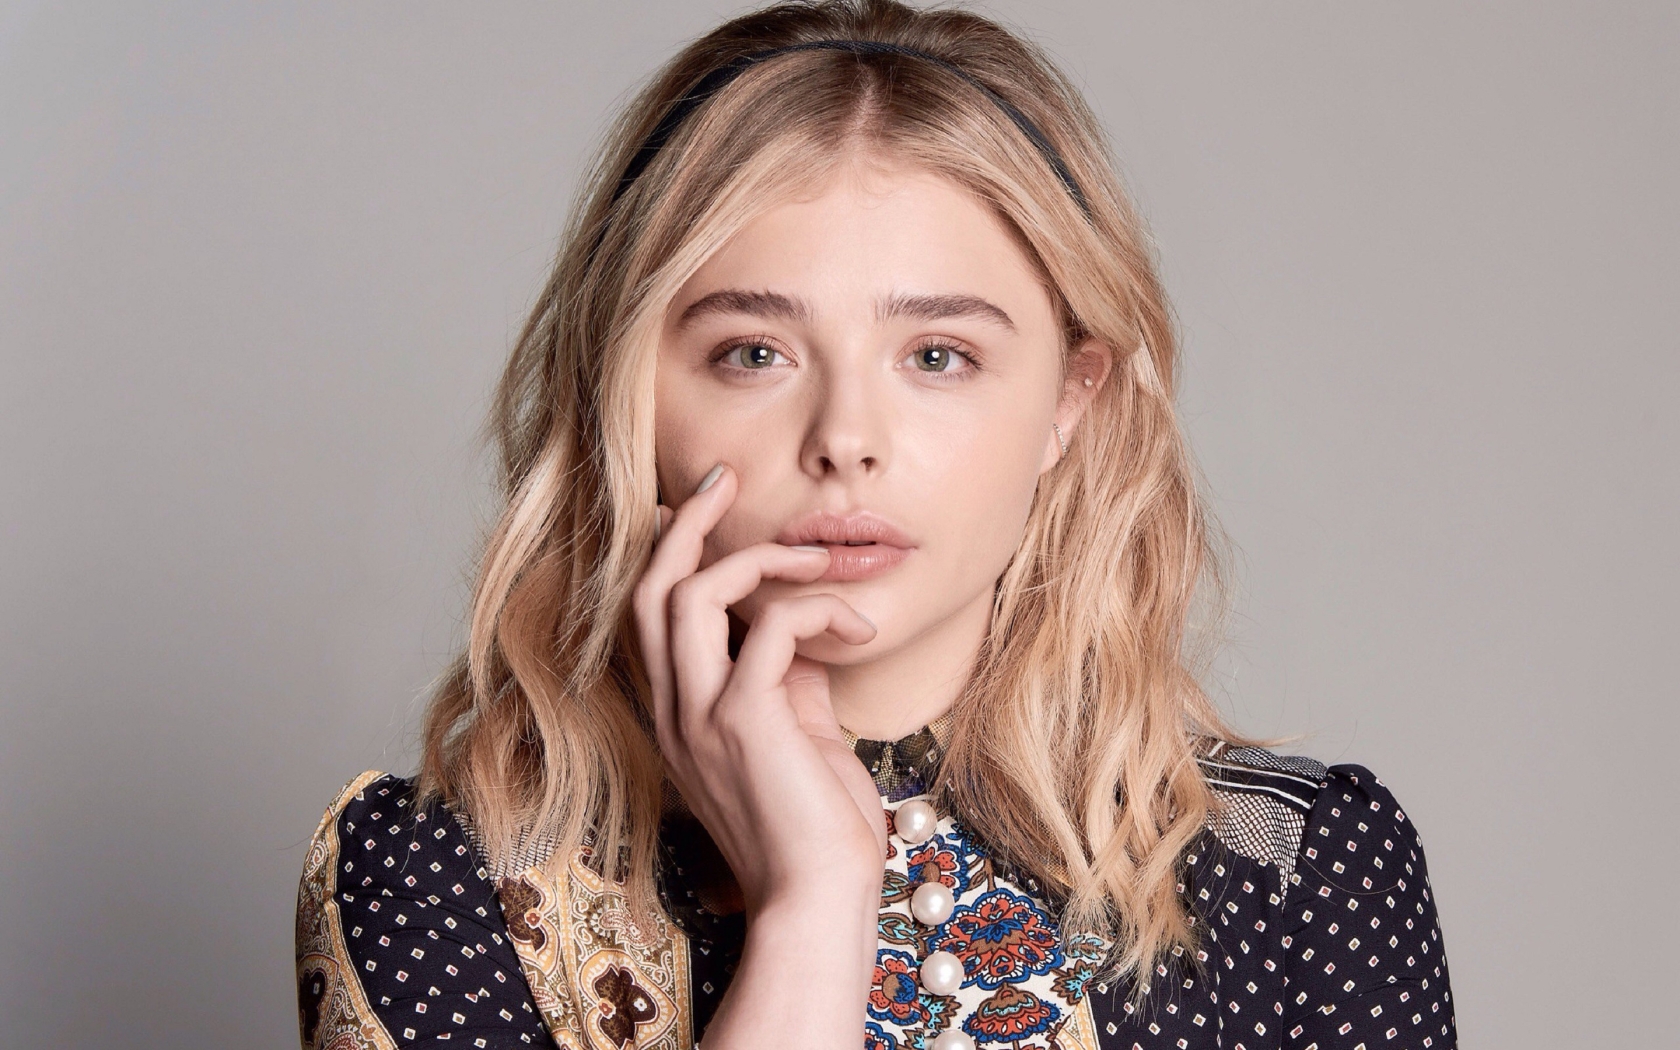 Chloe Moretz Looking Lovely for 1680 x 1050 widescreen resolution